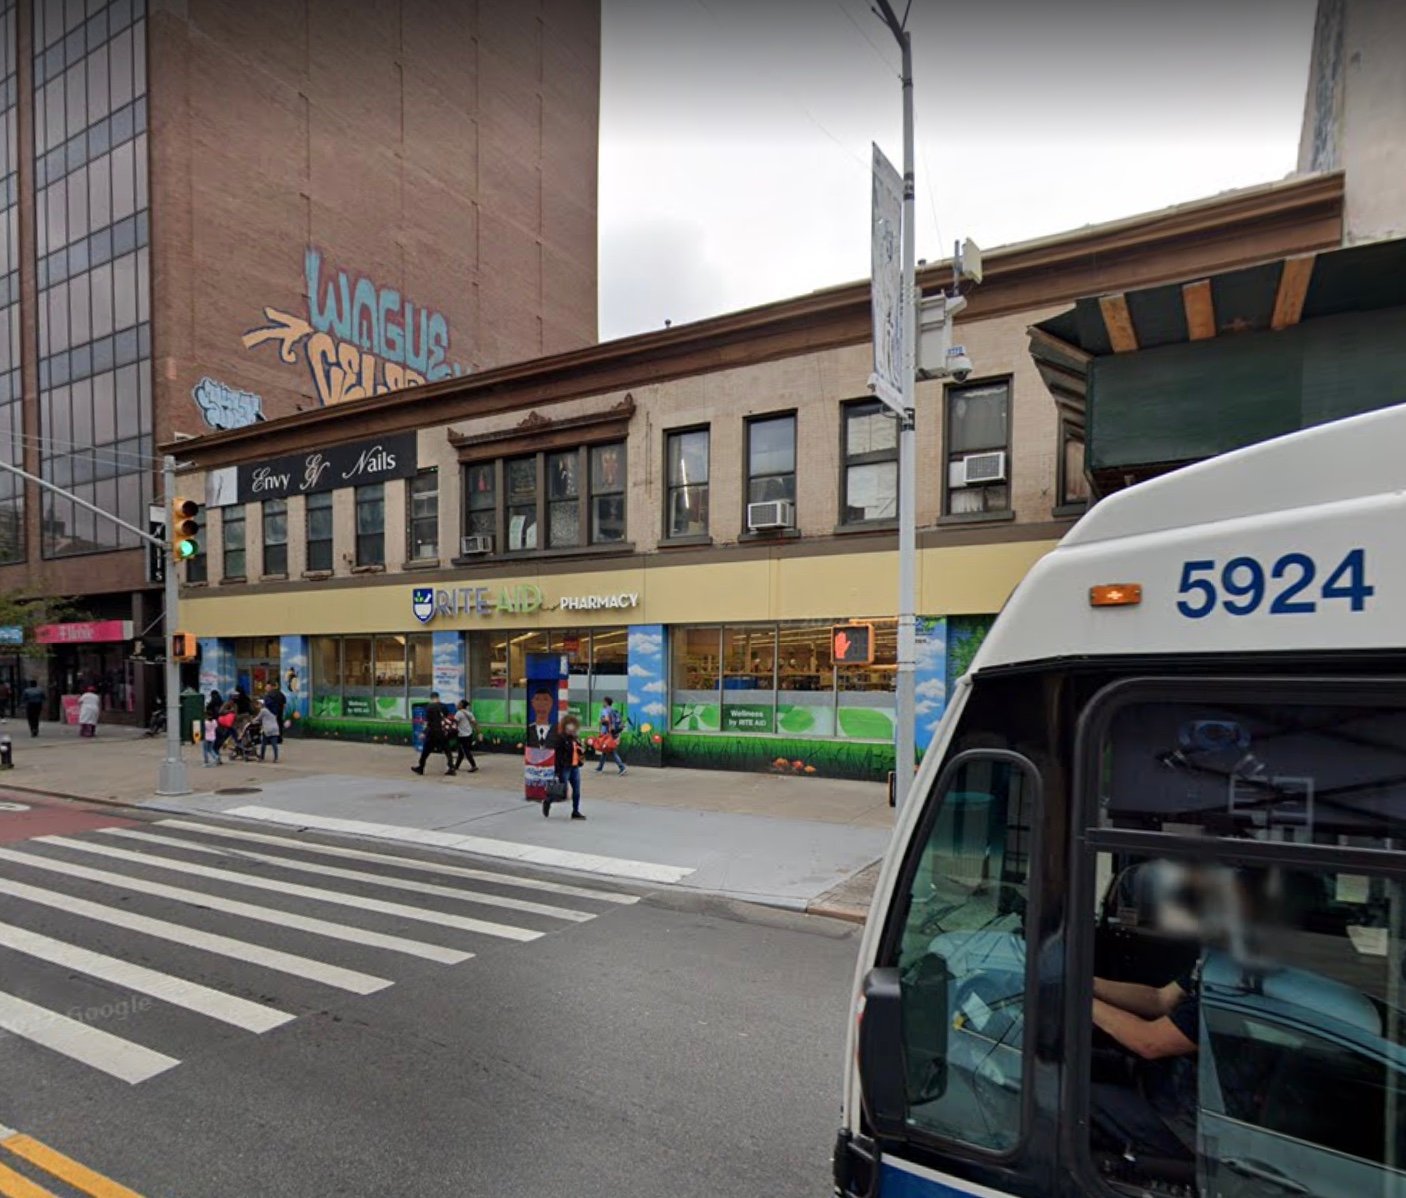 New Commercial+Residential Building on 125th Street Coming